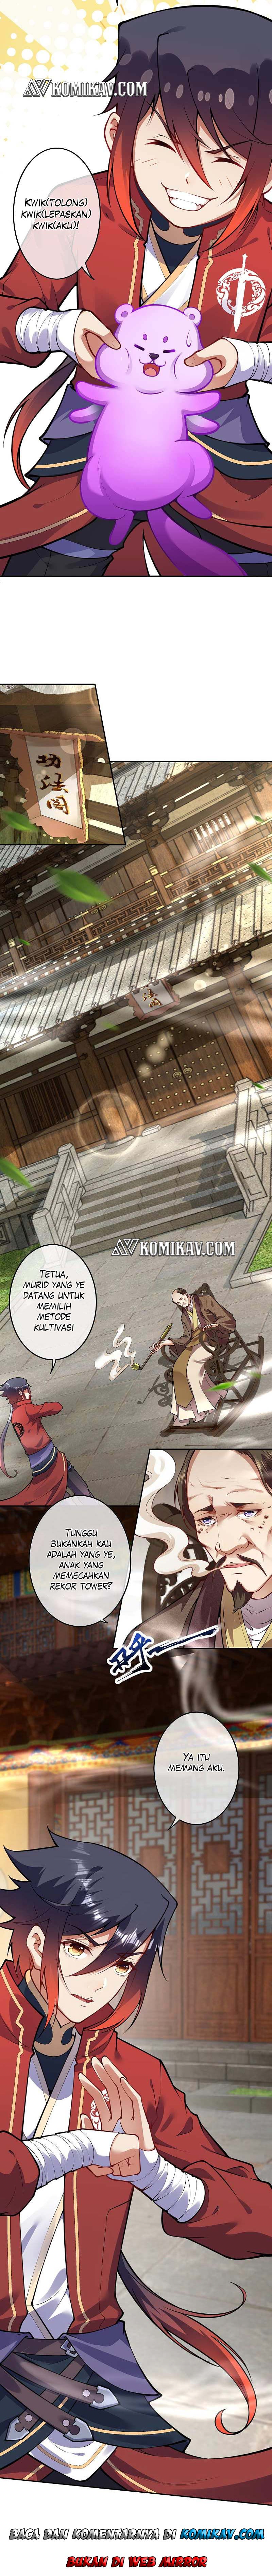 Invincible Sword Domain Chapter 68